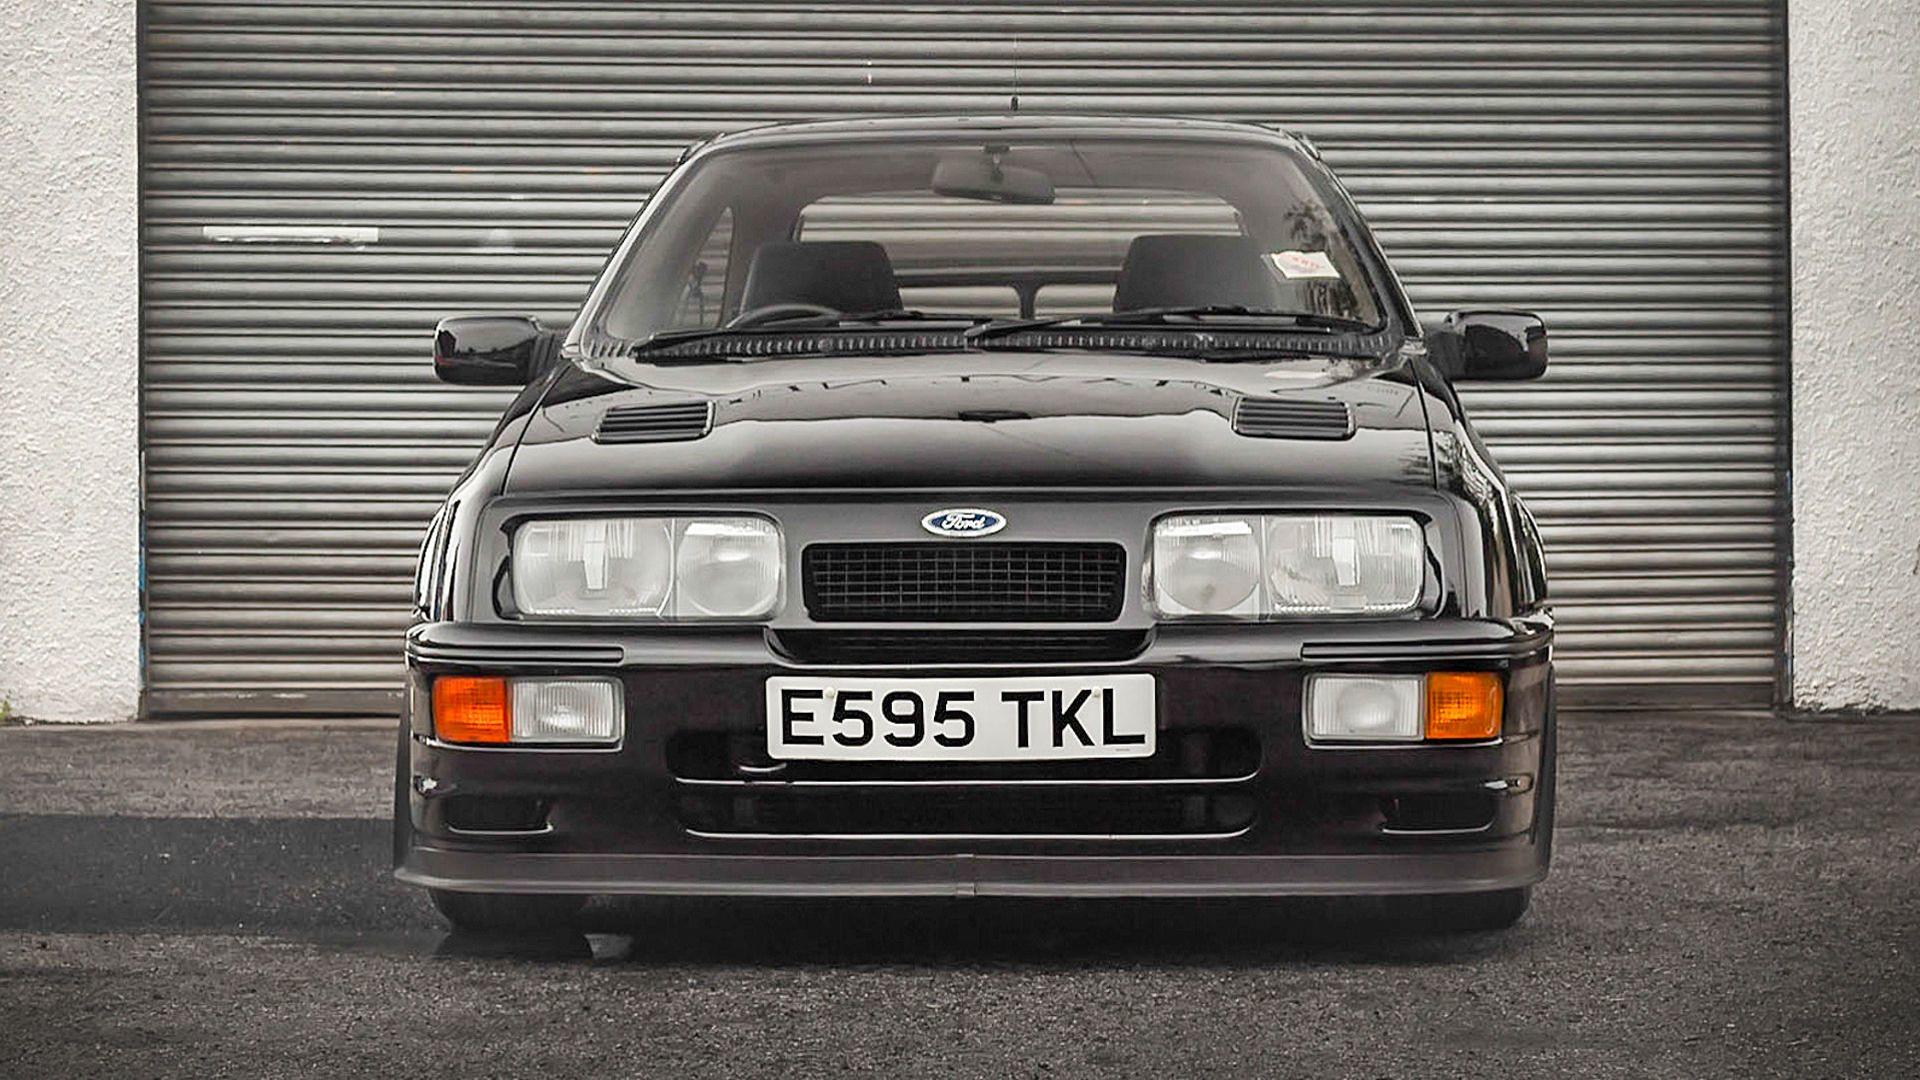 Ford Sierra Cosworth RS500. Motor1.com Photo